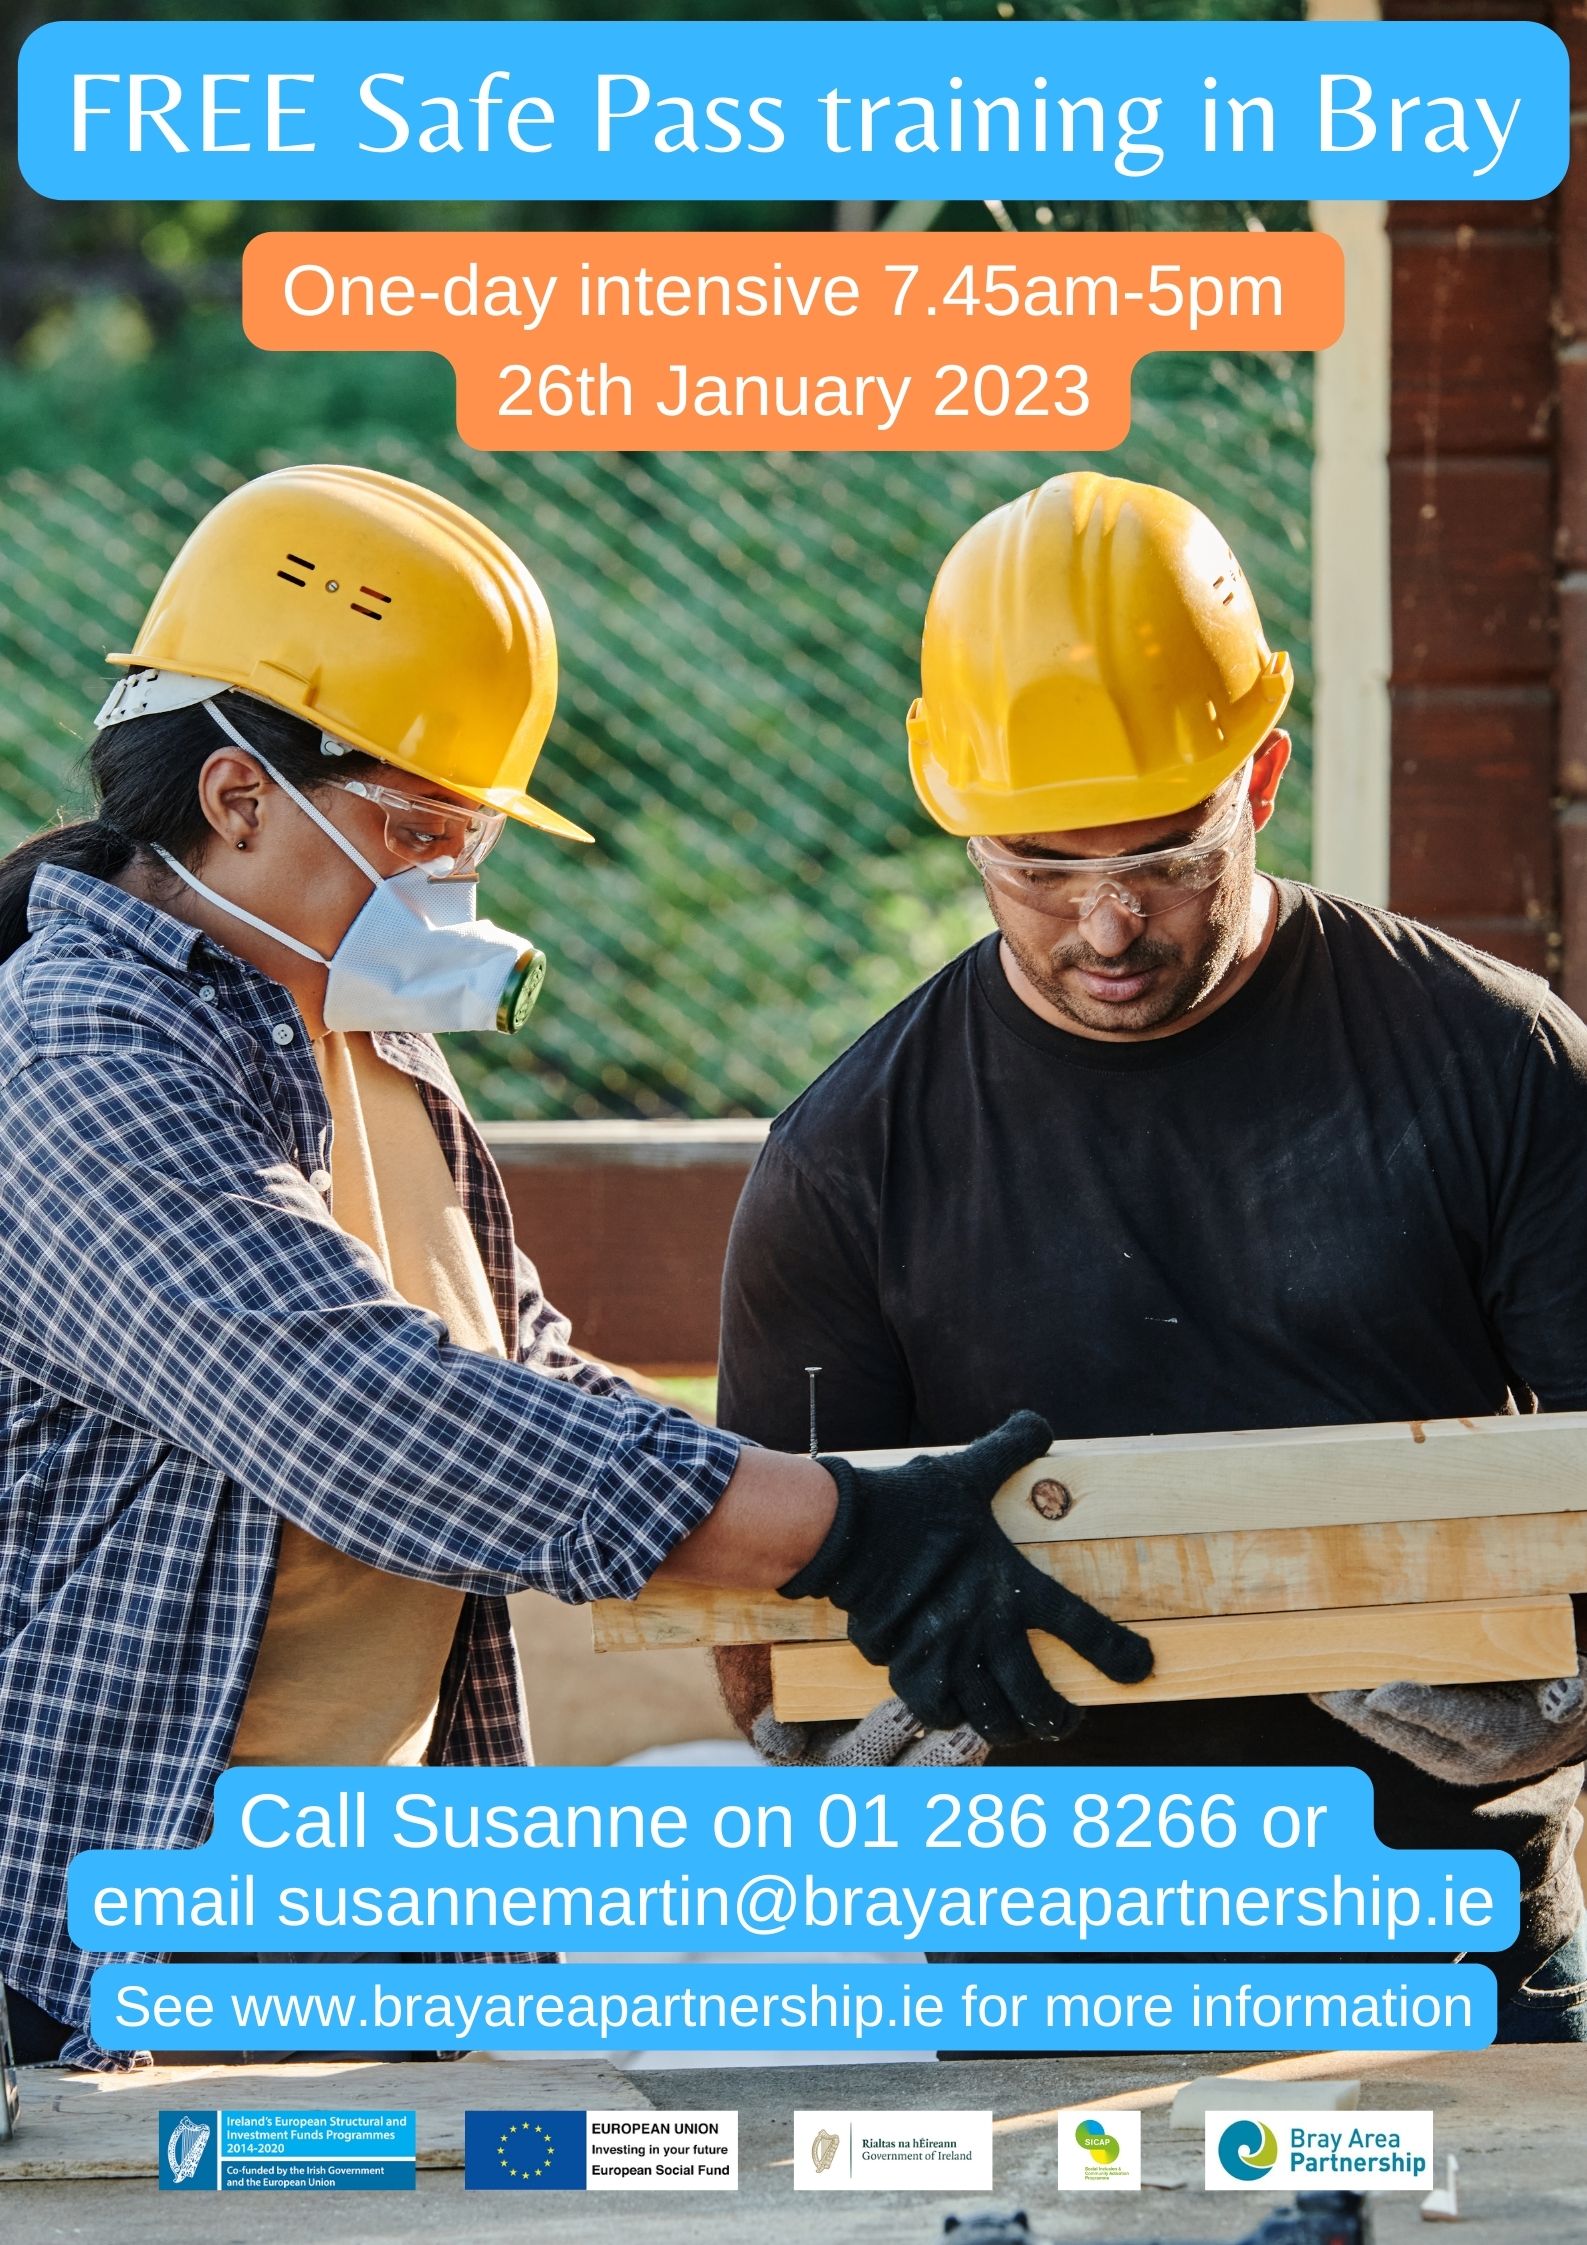 Poster showing woman and man construction workers with yellow hard hats